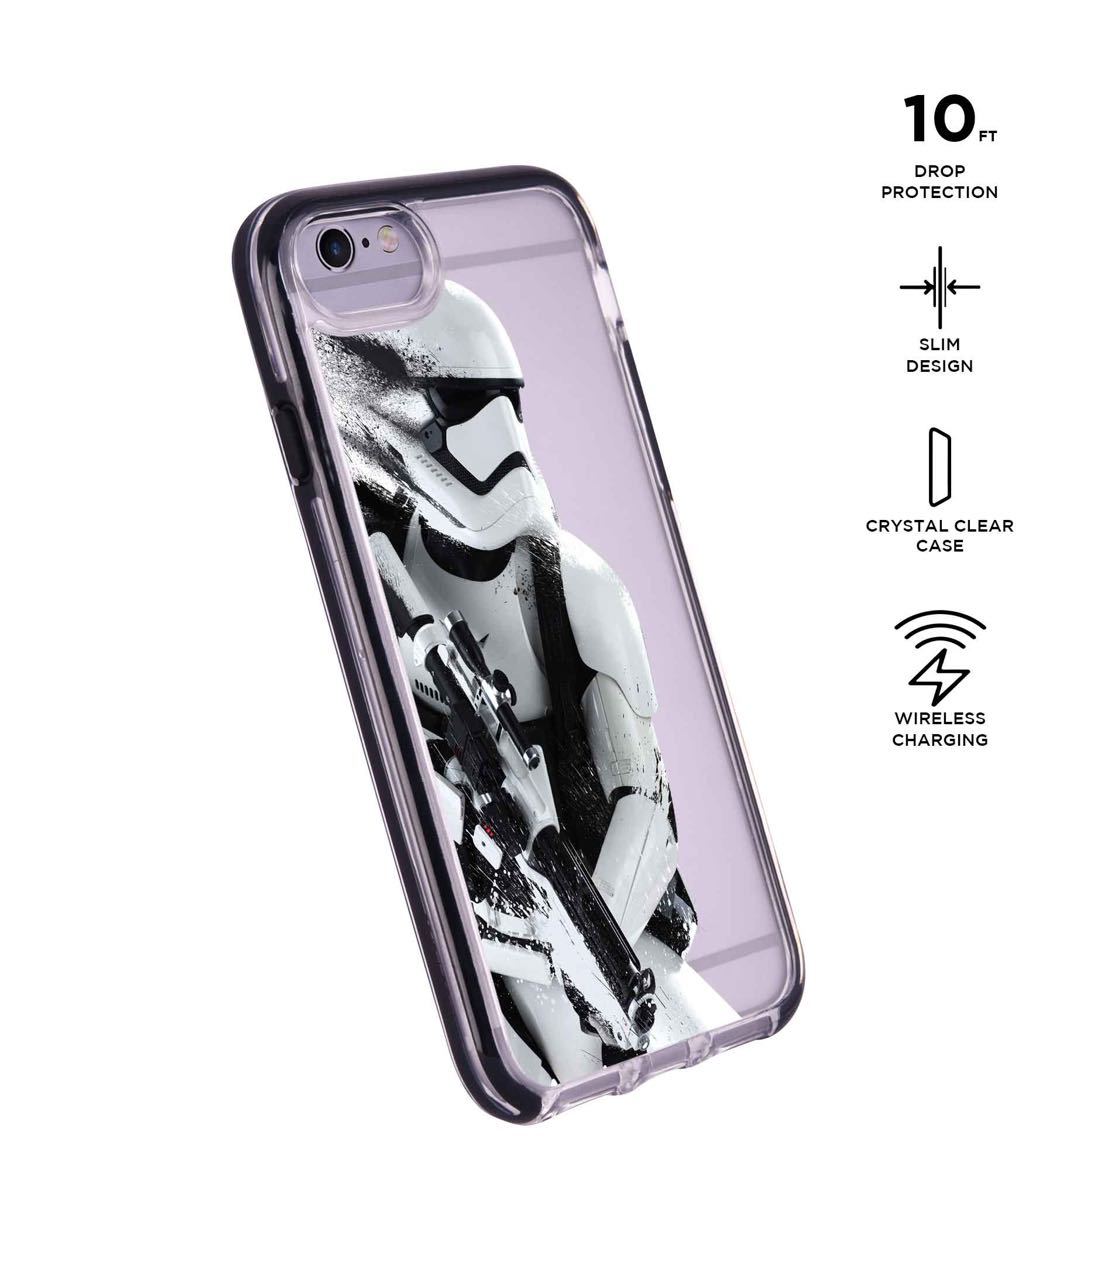 Trooper Storm - Extreme Phone Case for iPhone 6S Plus